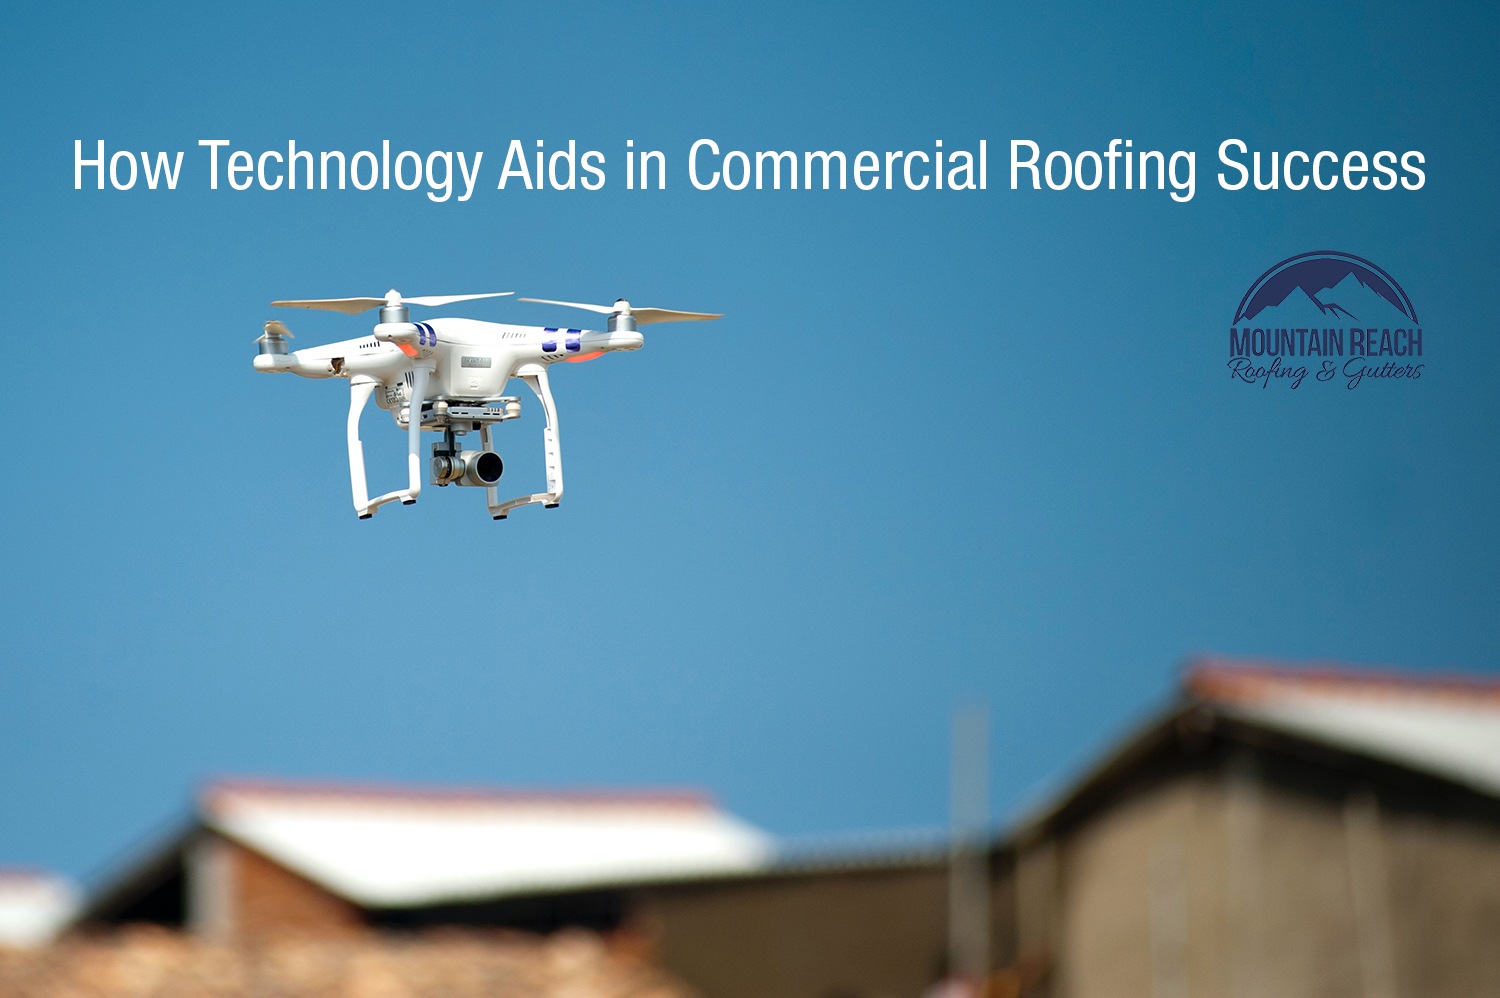 How Technology Aids in Commercial Roofing Success